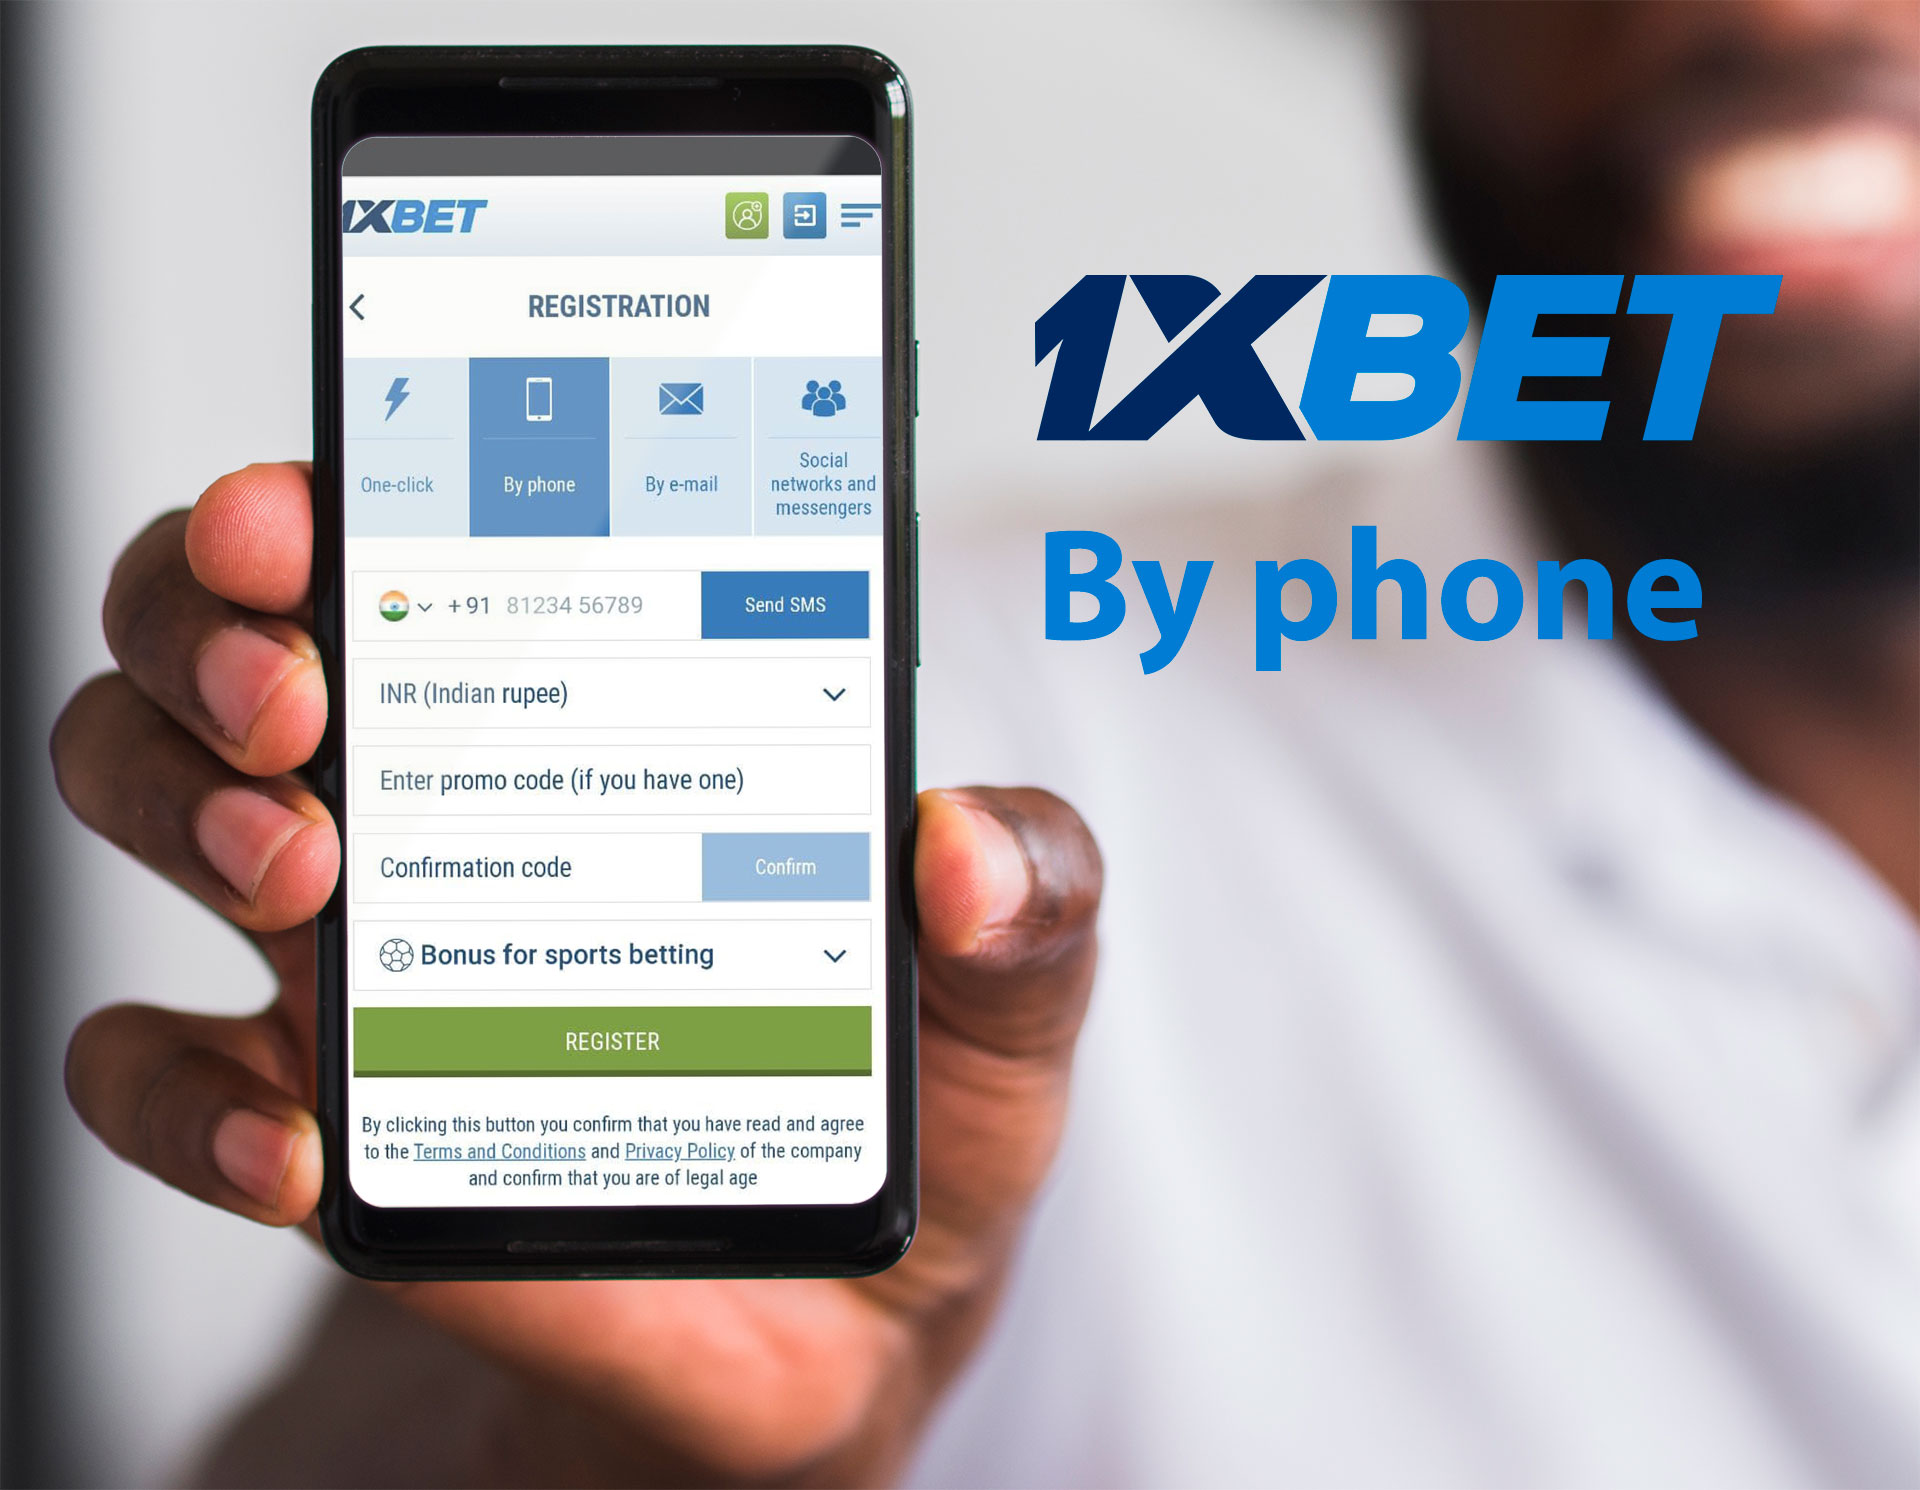 You can register at 1xbet using your phone number.